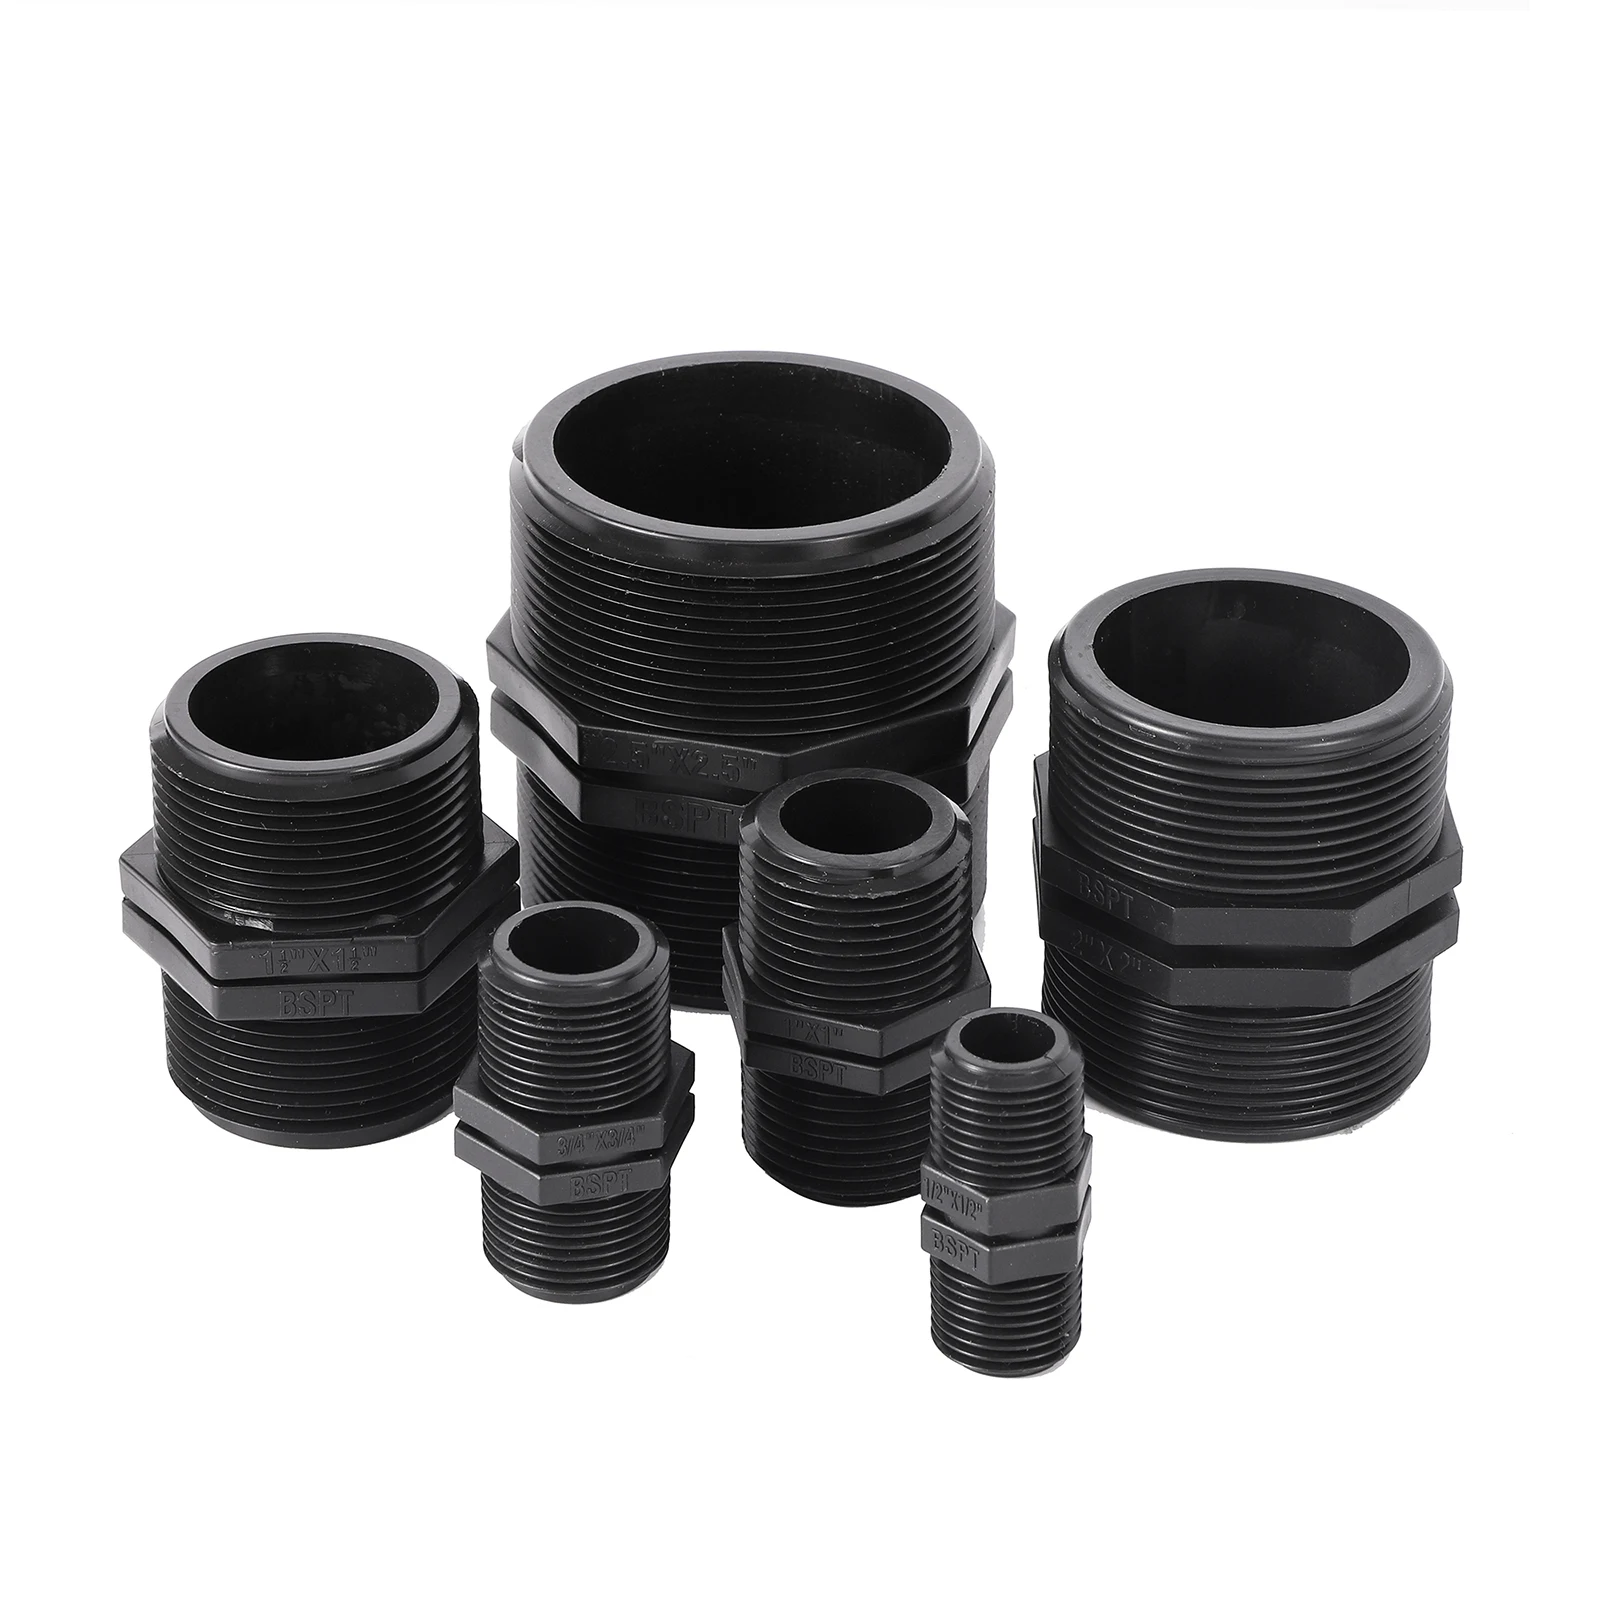 

1/2" 3/4" 1" 1.5" 2" 2.5 Inch BSP Male Thread Equal Adapter Hose Pipe Connection Fittings Farm Greenhouse Park Garden Irrigation